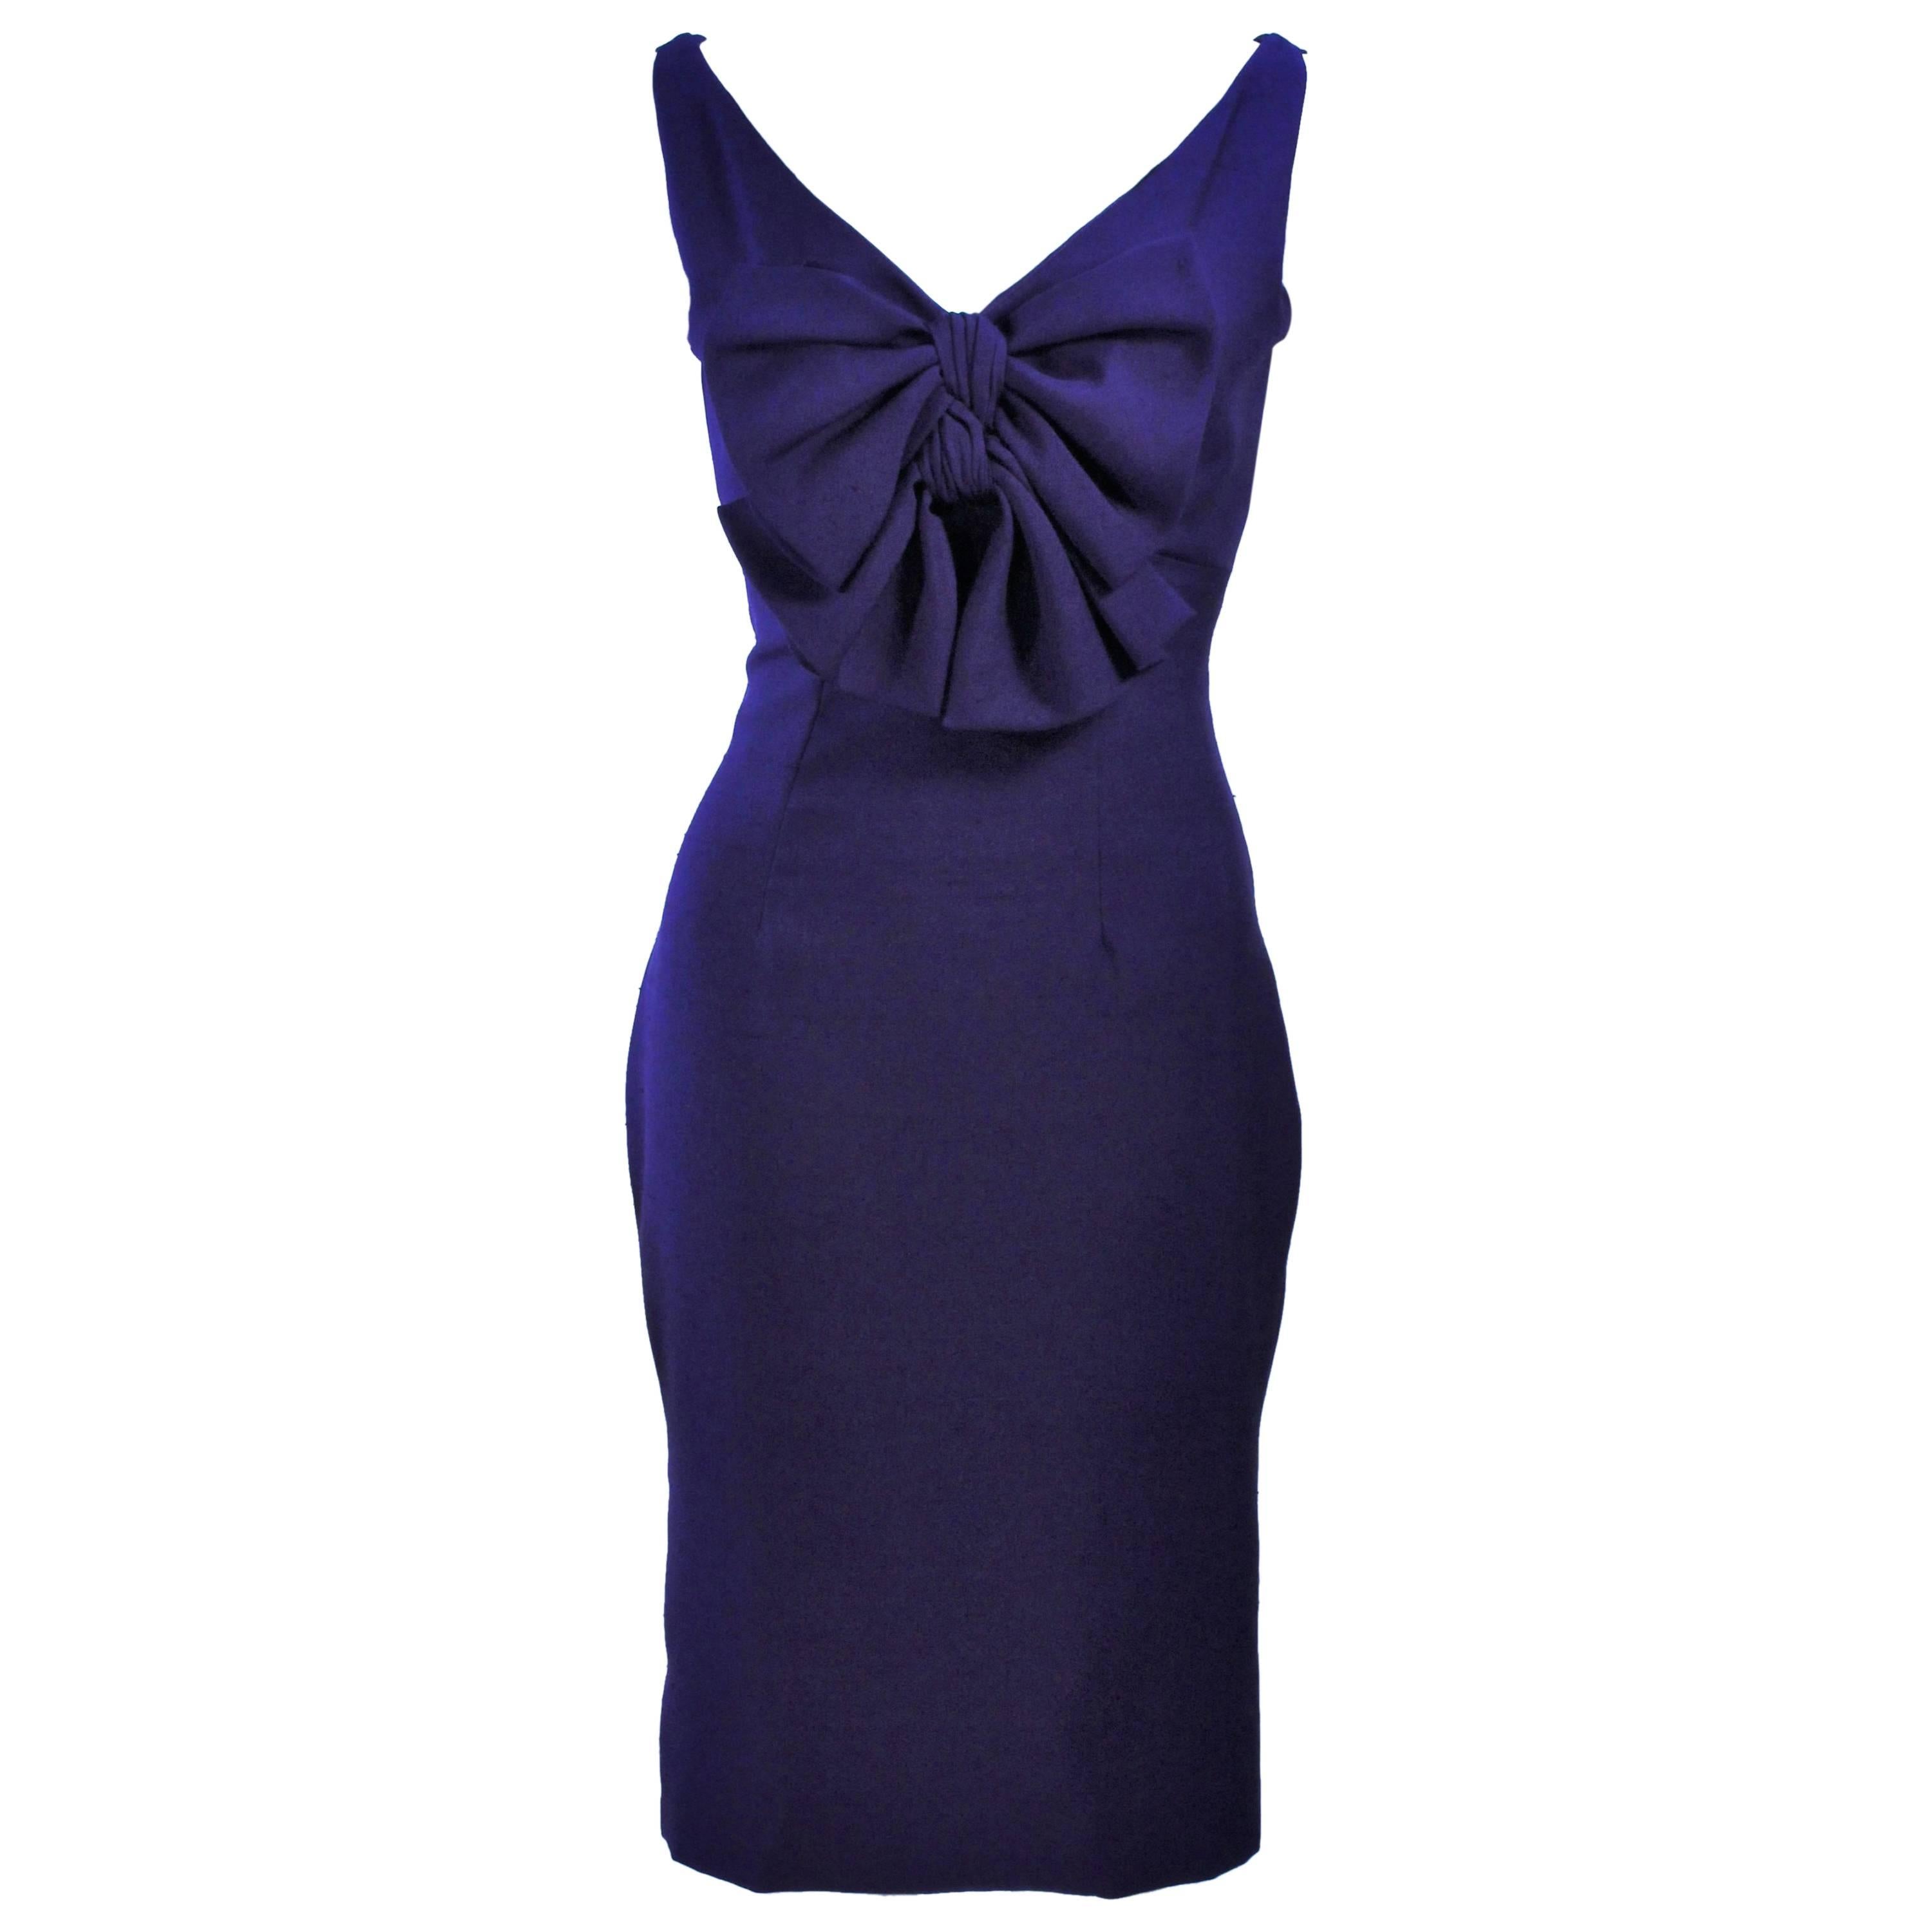 ELIZABETH MASON COUTURE Purple Silk Cocktail Dress with Bow Made to Order For Sale